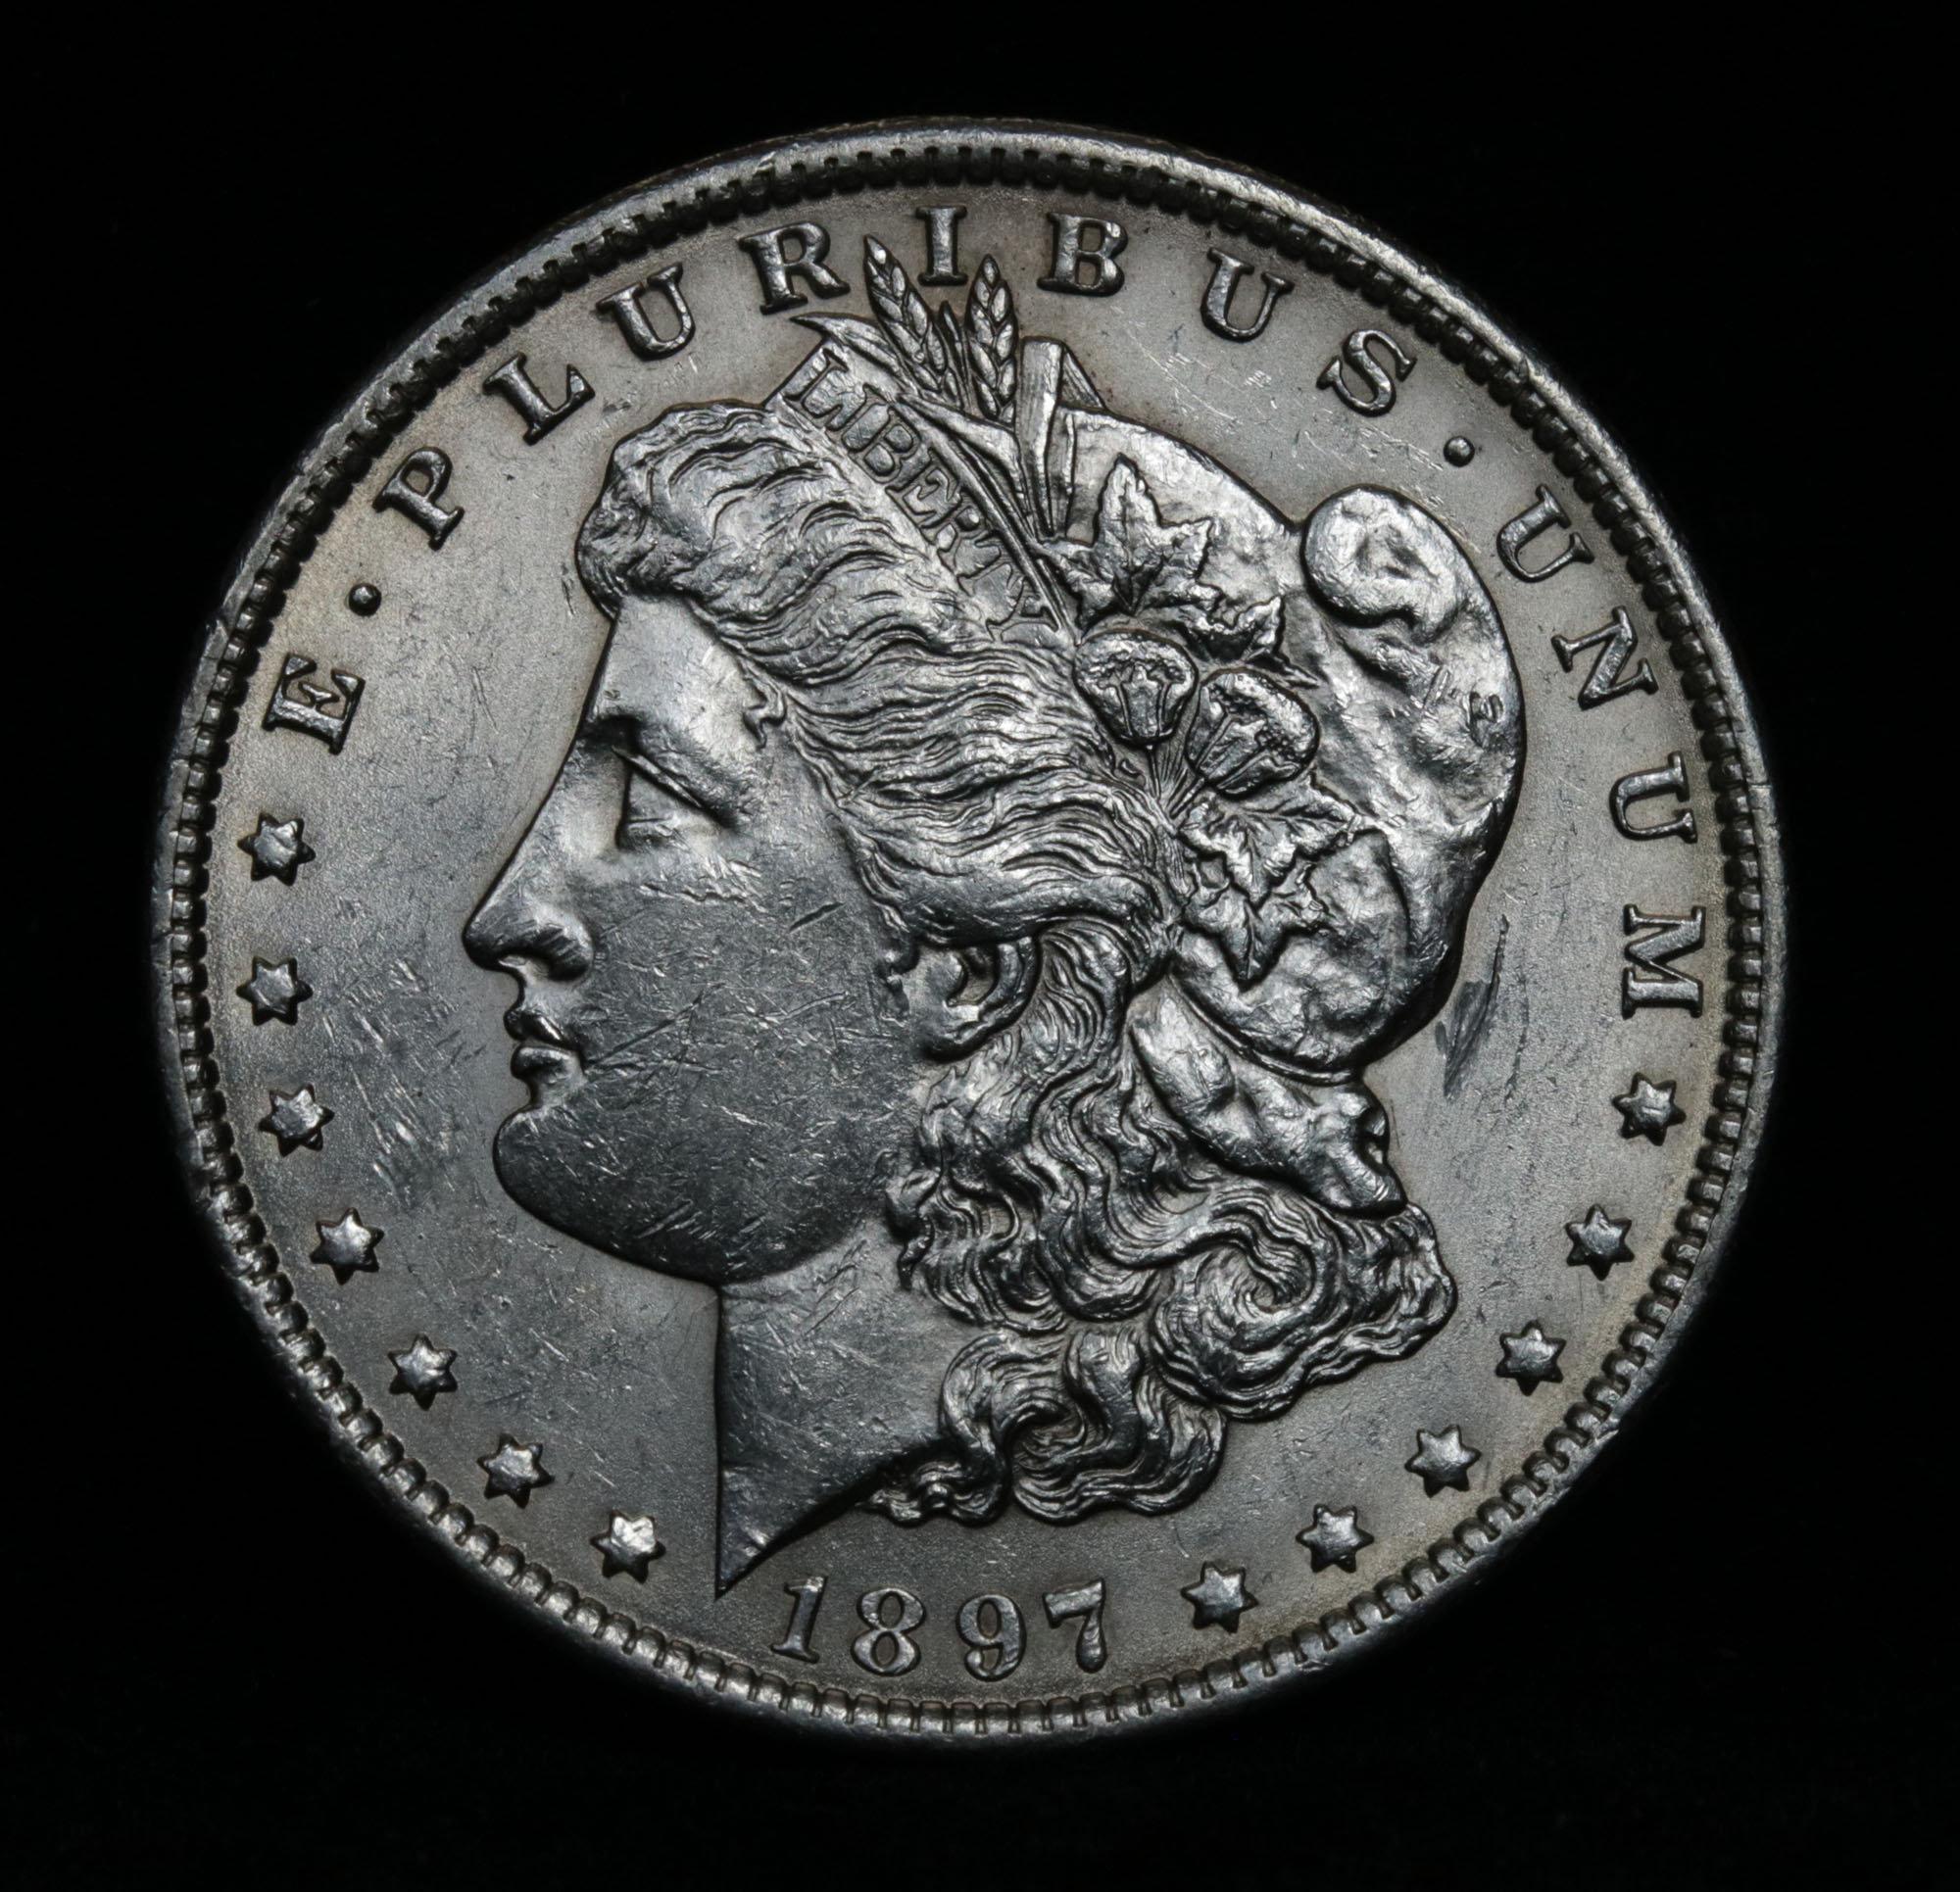 ***Auction Highlight*** Key date 1897-o Morgan Dollar $1 Graded Select Unc by USCG (fc)